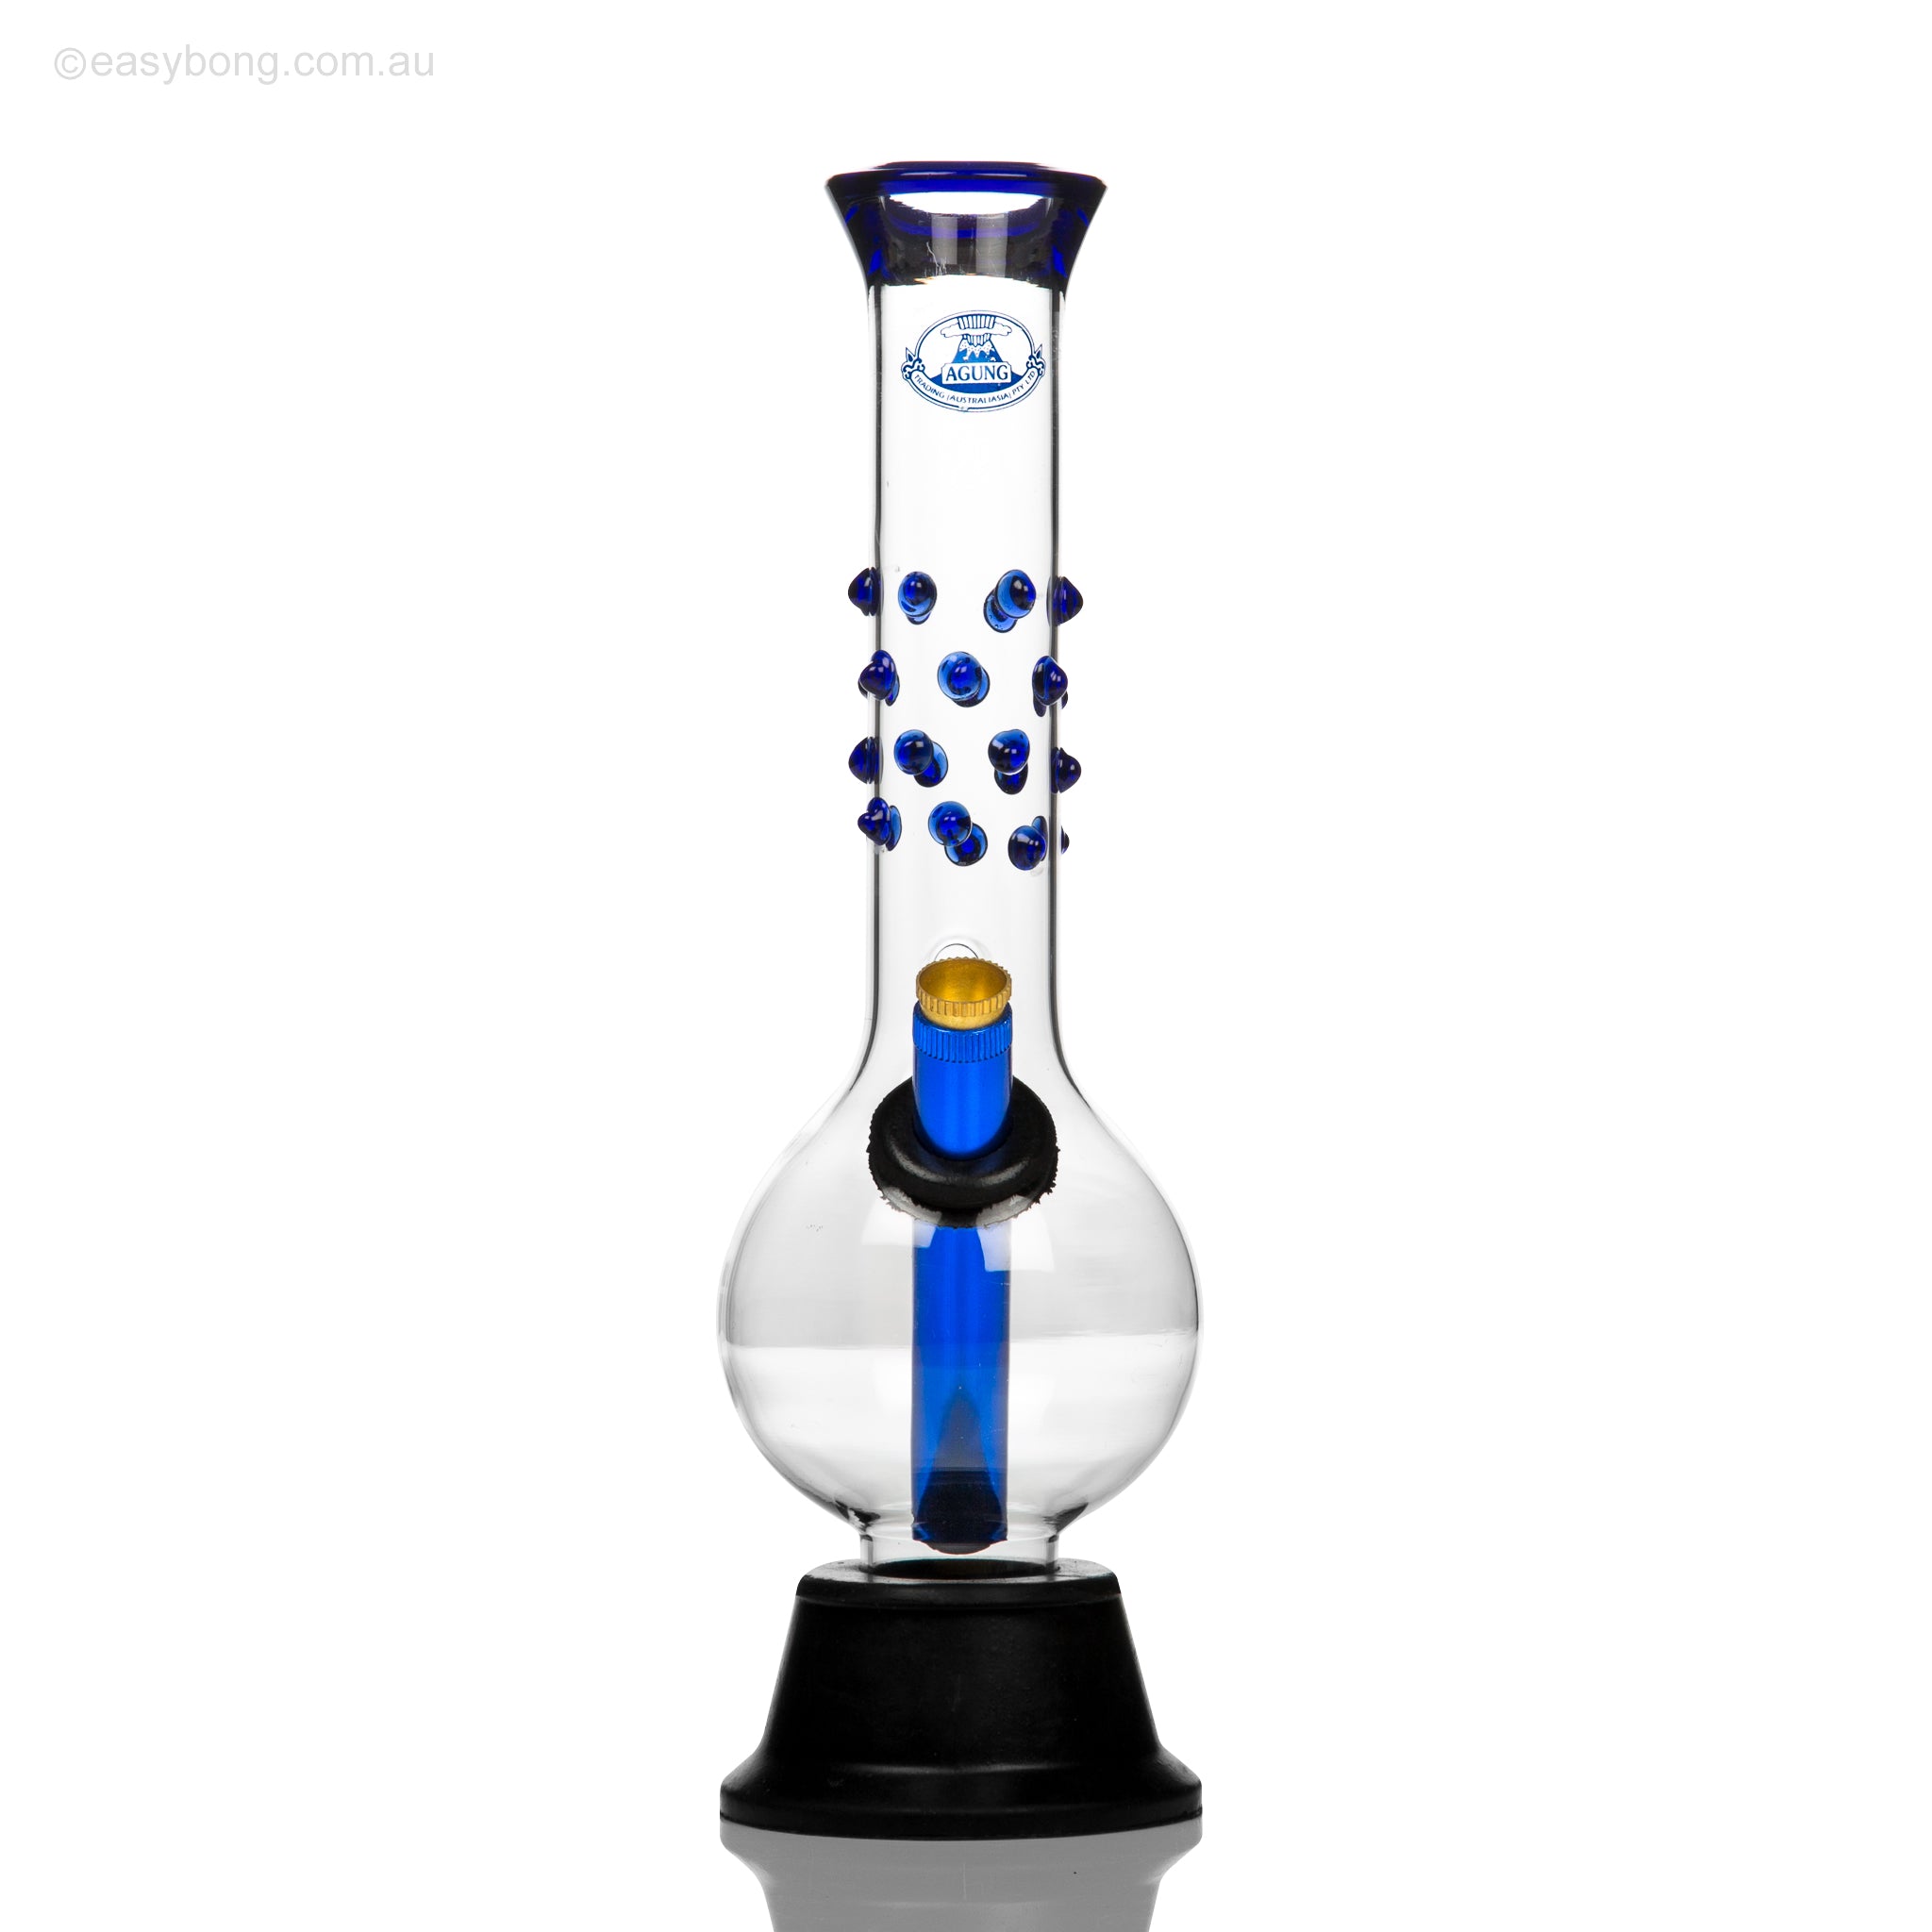 Glass bong designed for Aussie stoners with metal stem and brass cone piece.